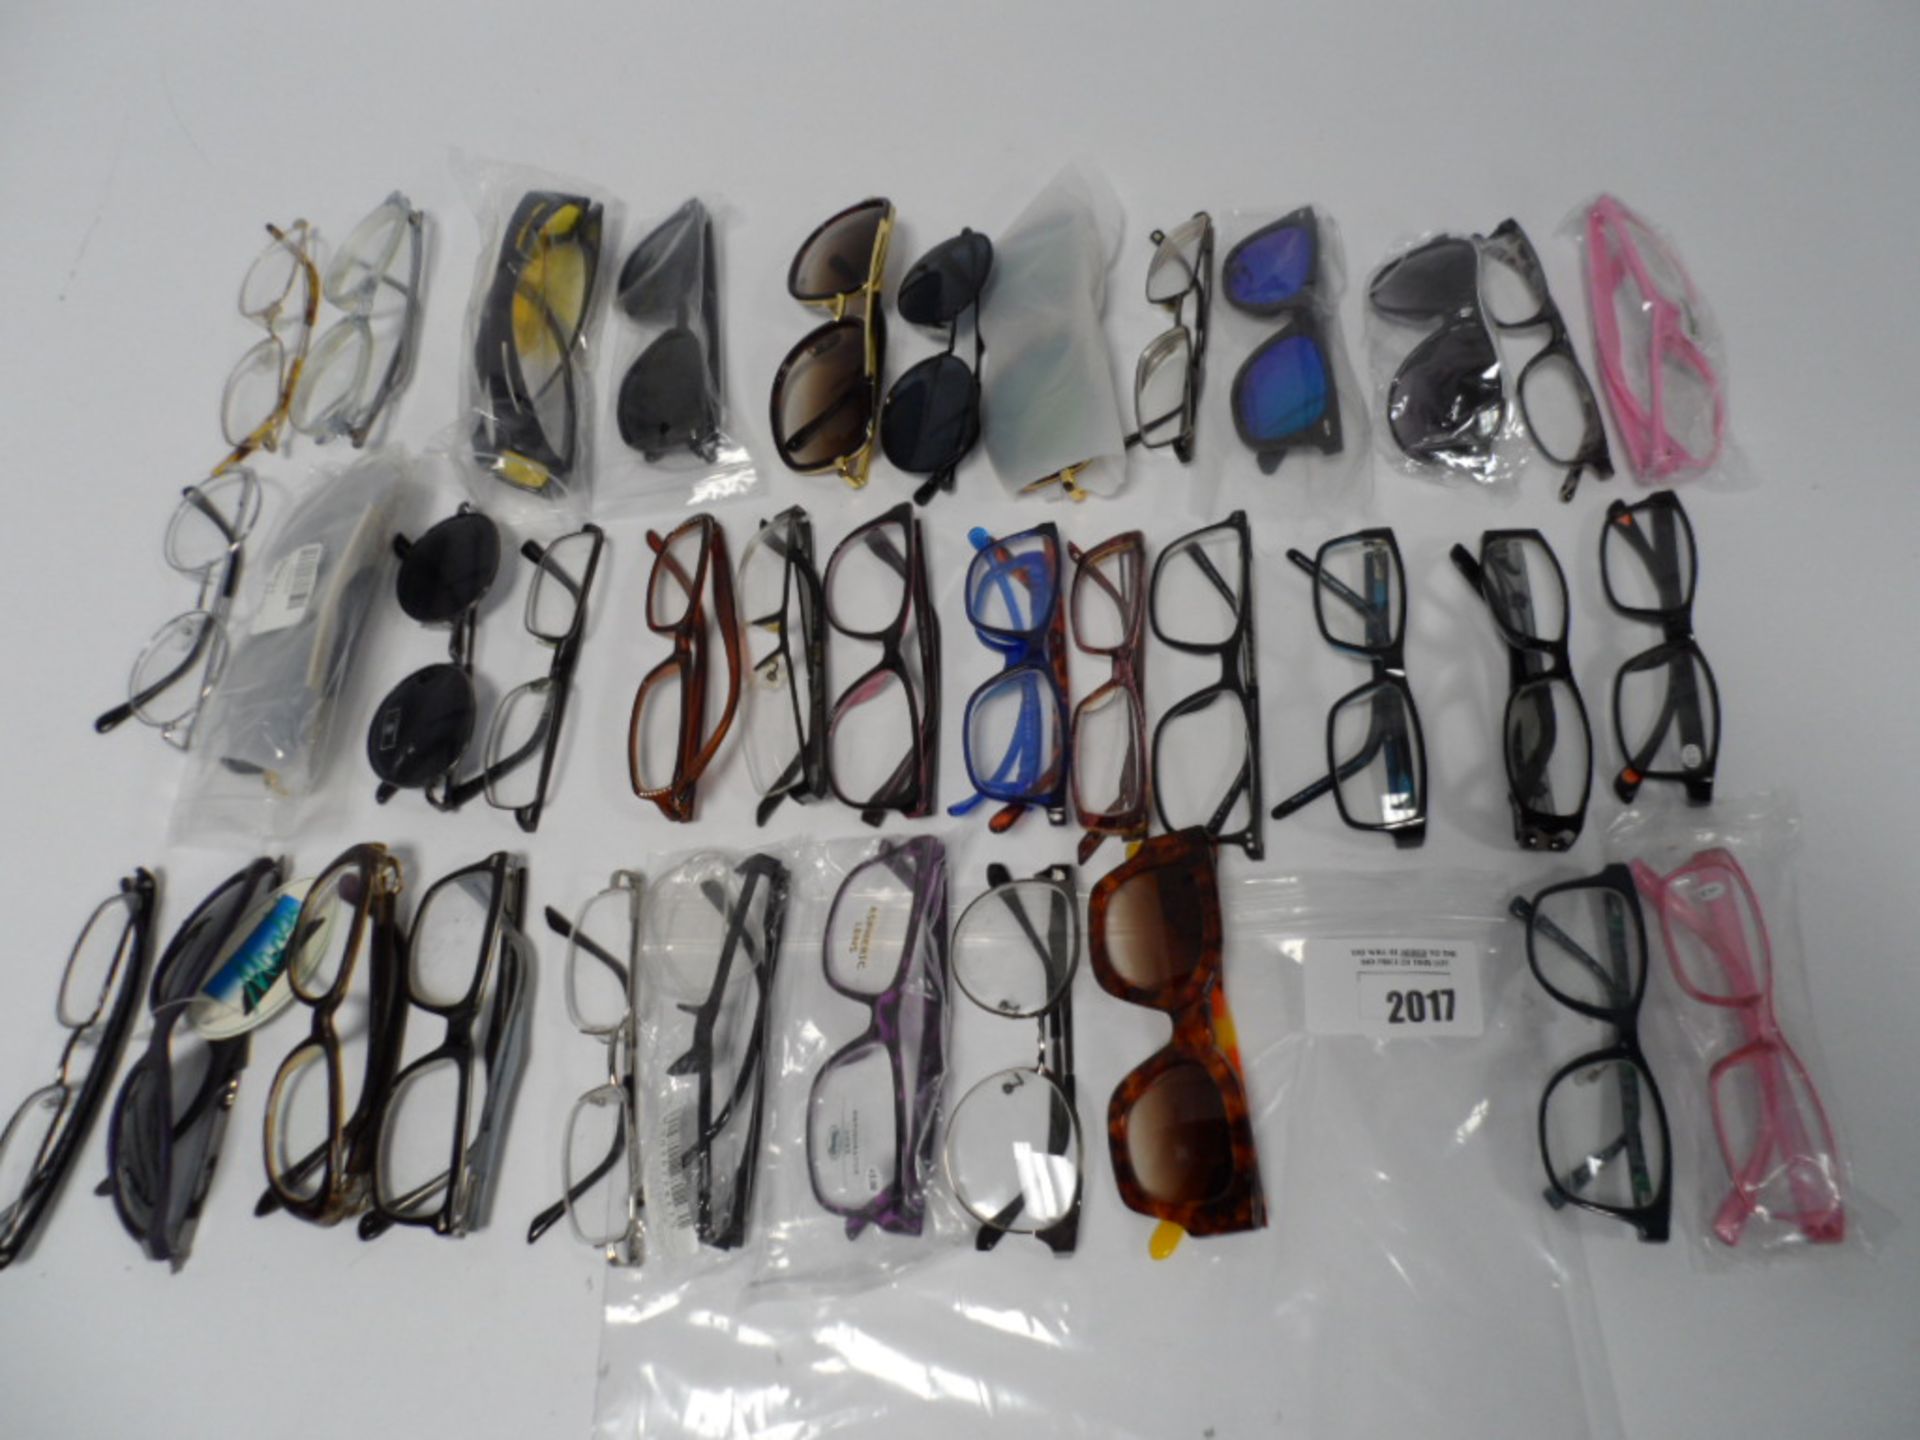 Bag containing various loose glasses and sunglasses.